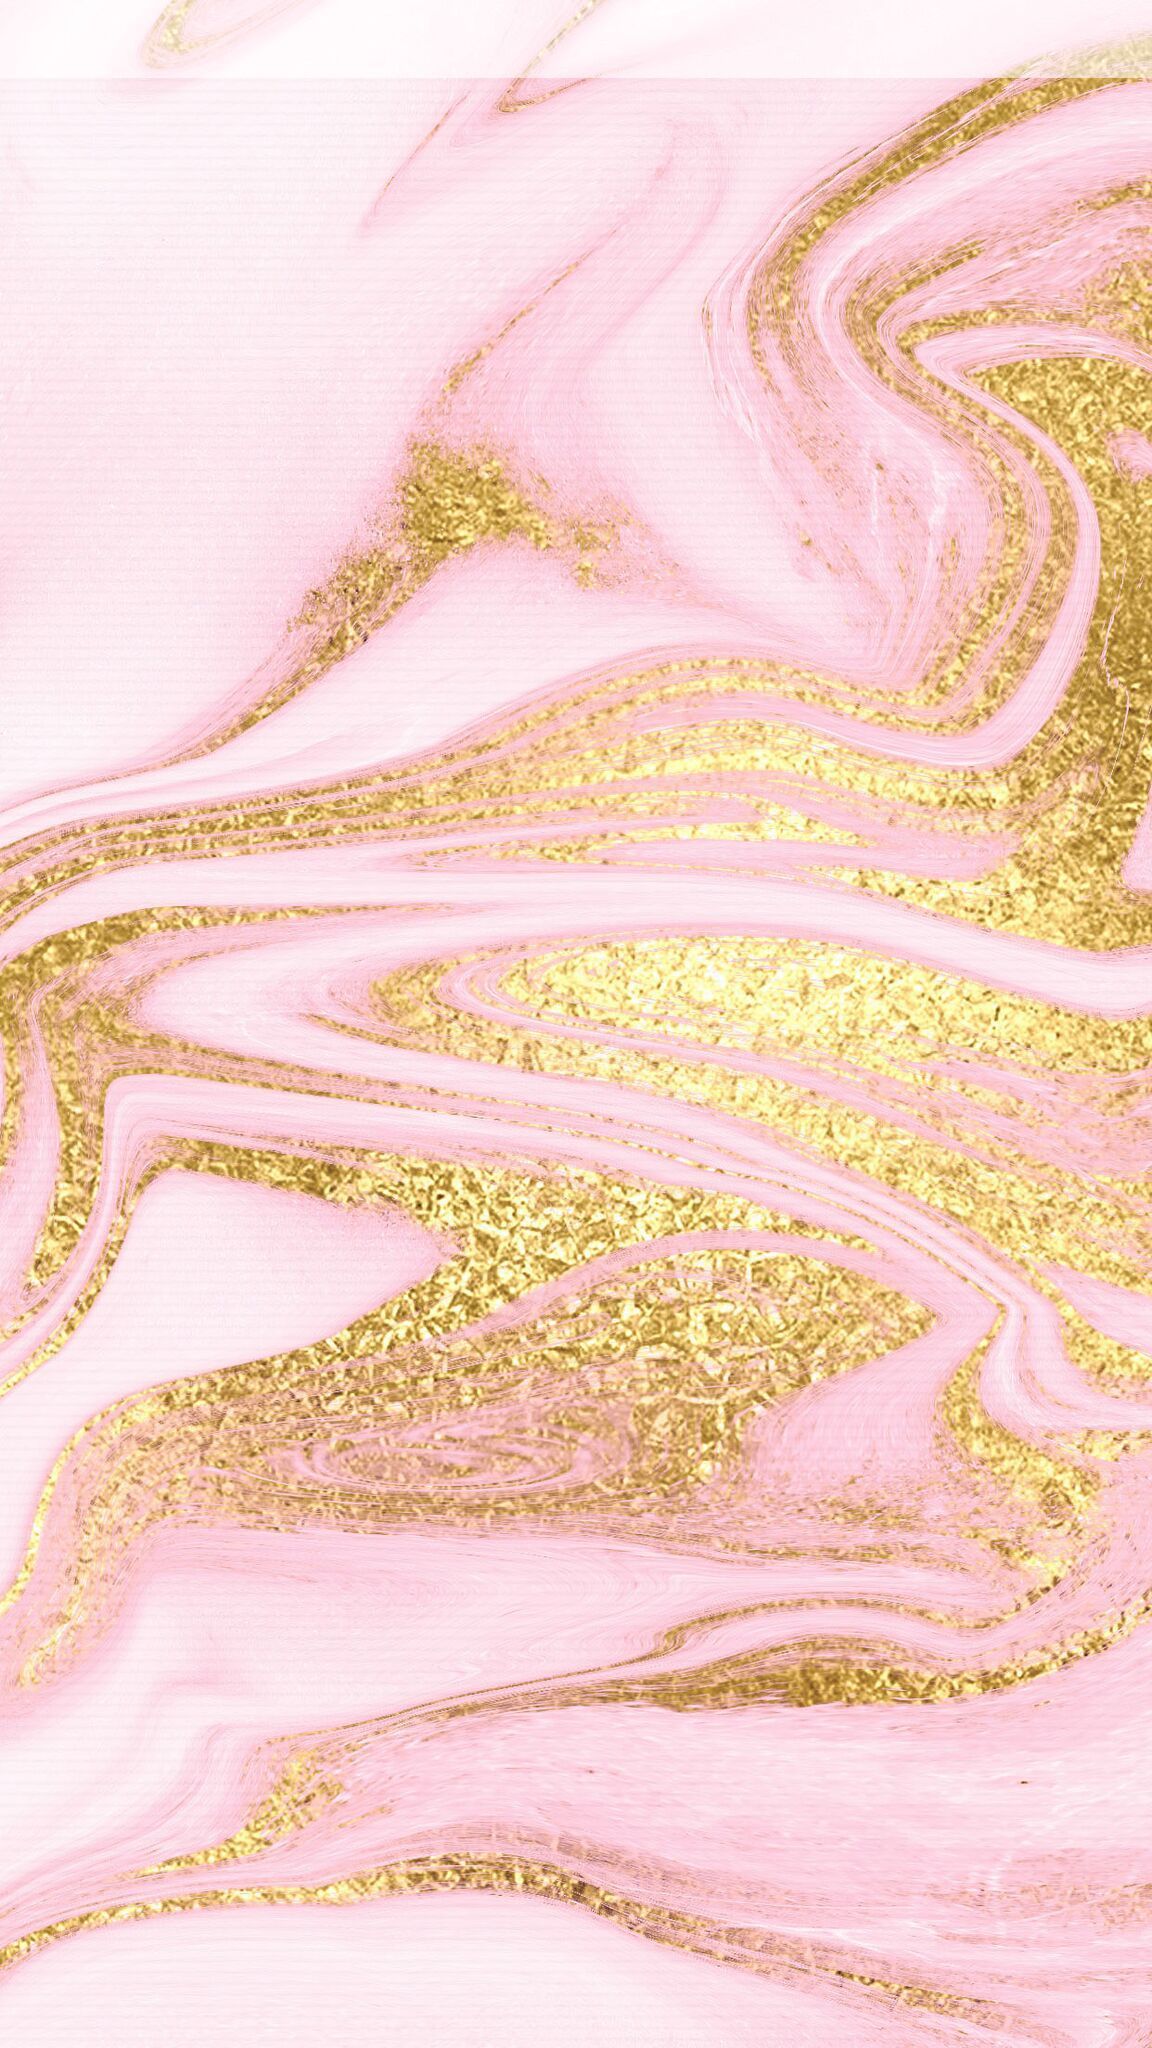 Shared with Dropbox. Pastel iphone wallpaper, Pink wallpaper iphone, Glitter wallpaper